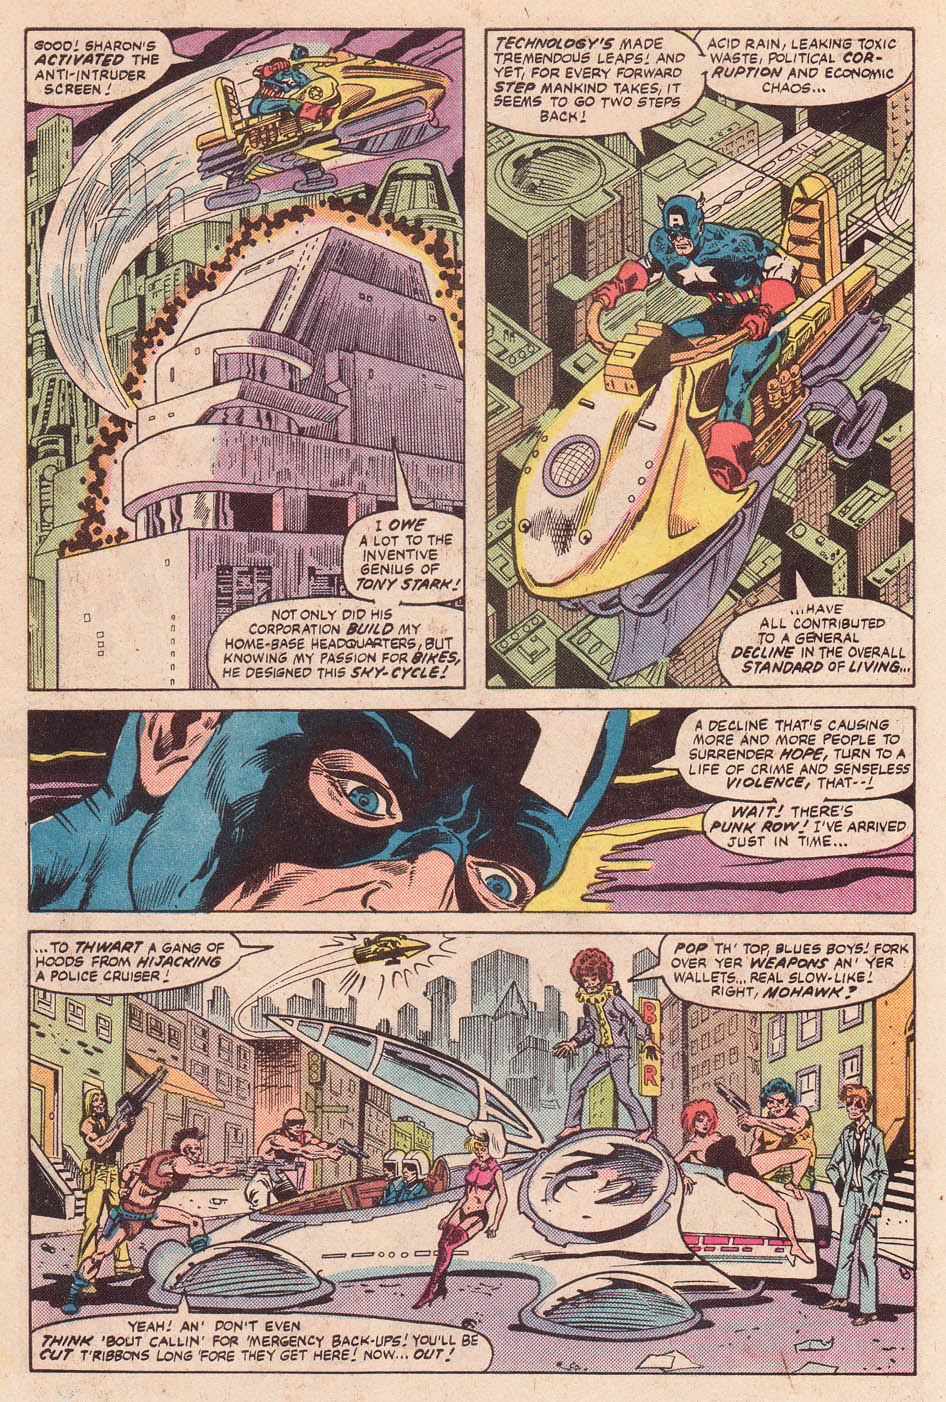 What If? (1977) issue 38 - Daredevil and Captain America - Page 18